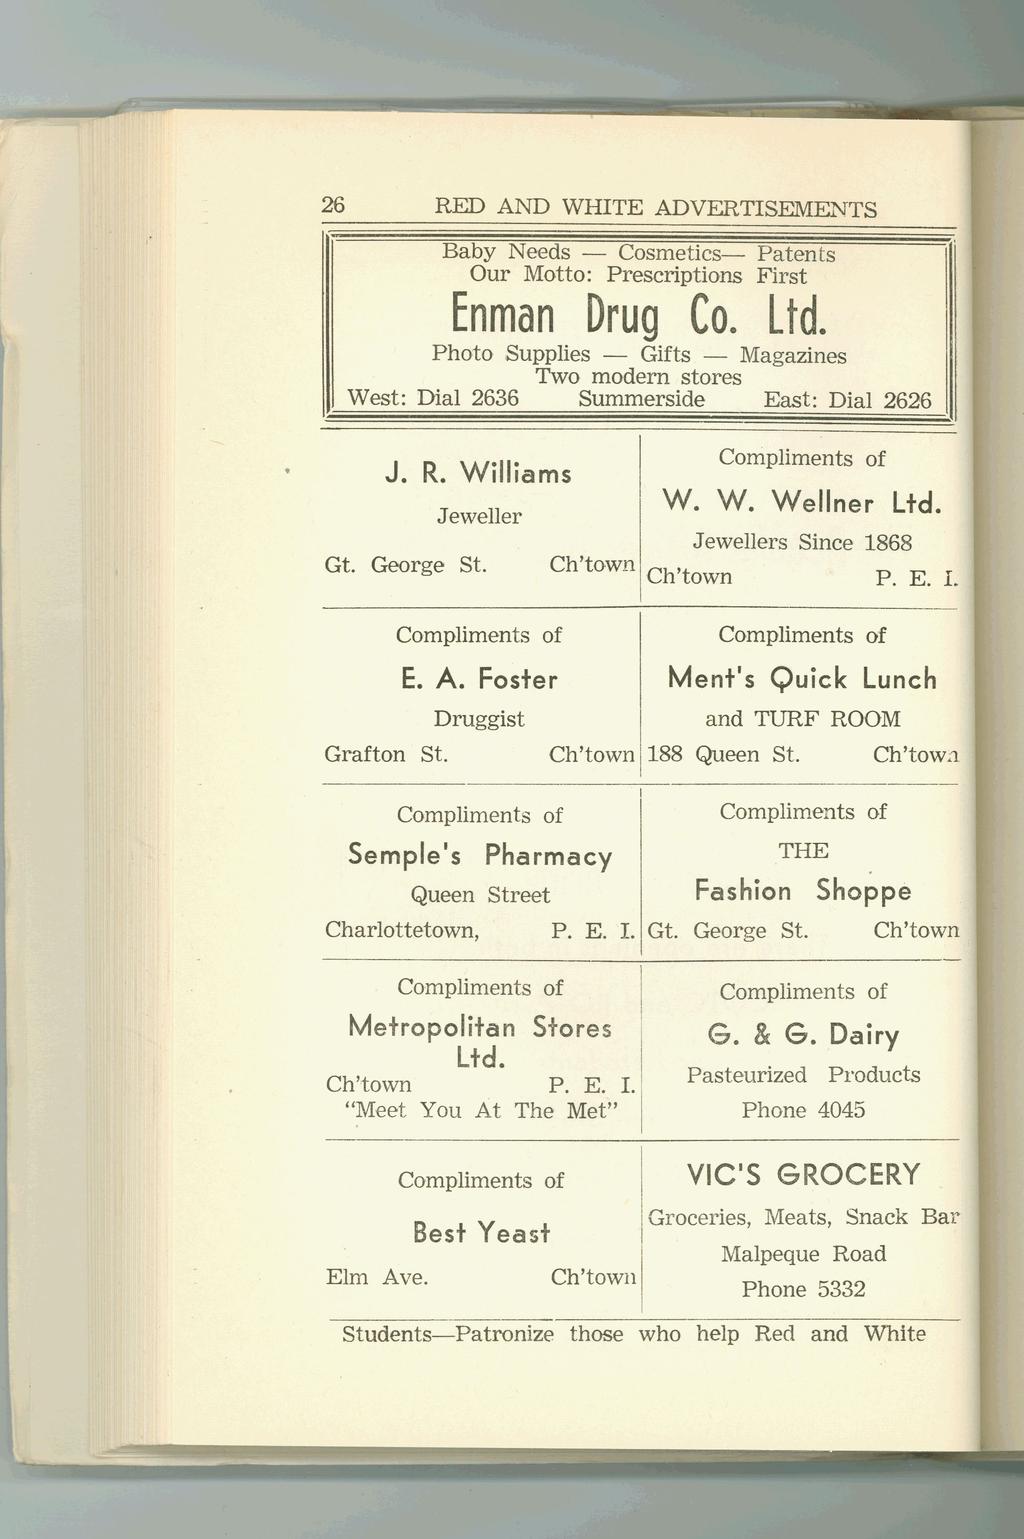 RED AND WHITE ADVERTISENIWTS 26 Our Motto: Prescriptions First J. R. Williams W. W. Wellner Ltd. Jeweller Gt. George St. P. E. i. Ment s Quick Lunch E. A. Foster Druggist Grafton St.